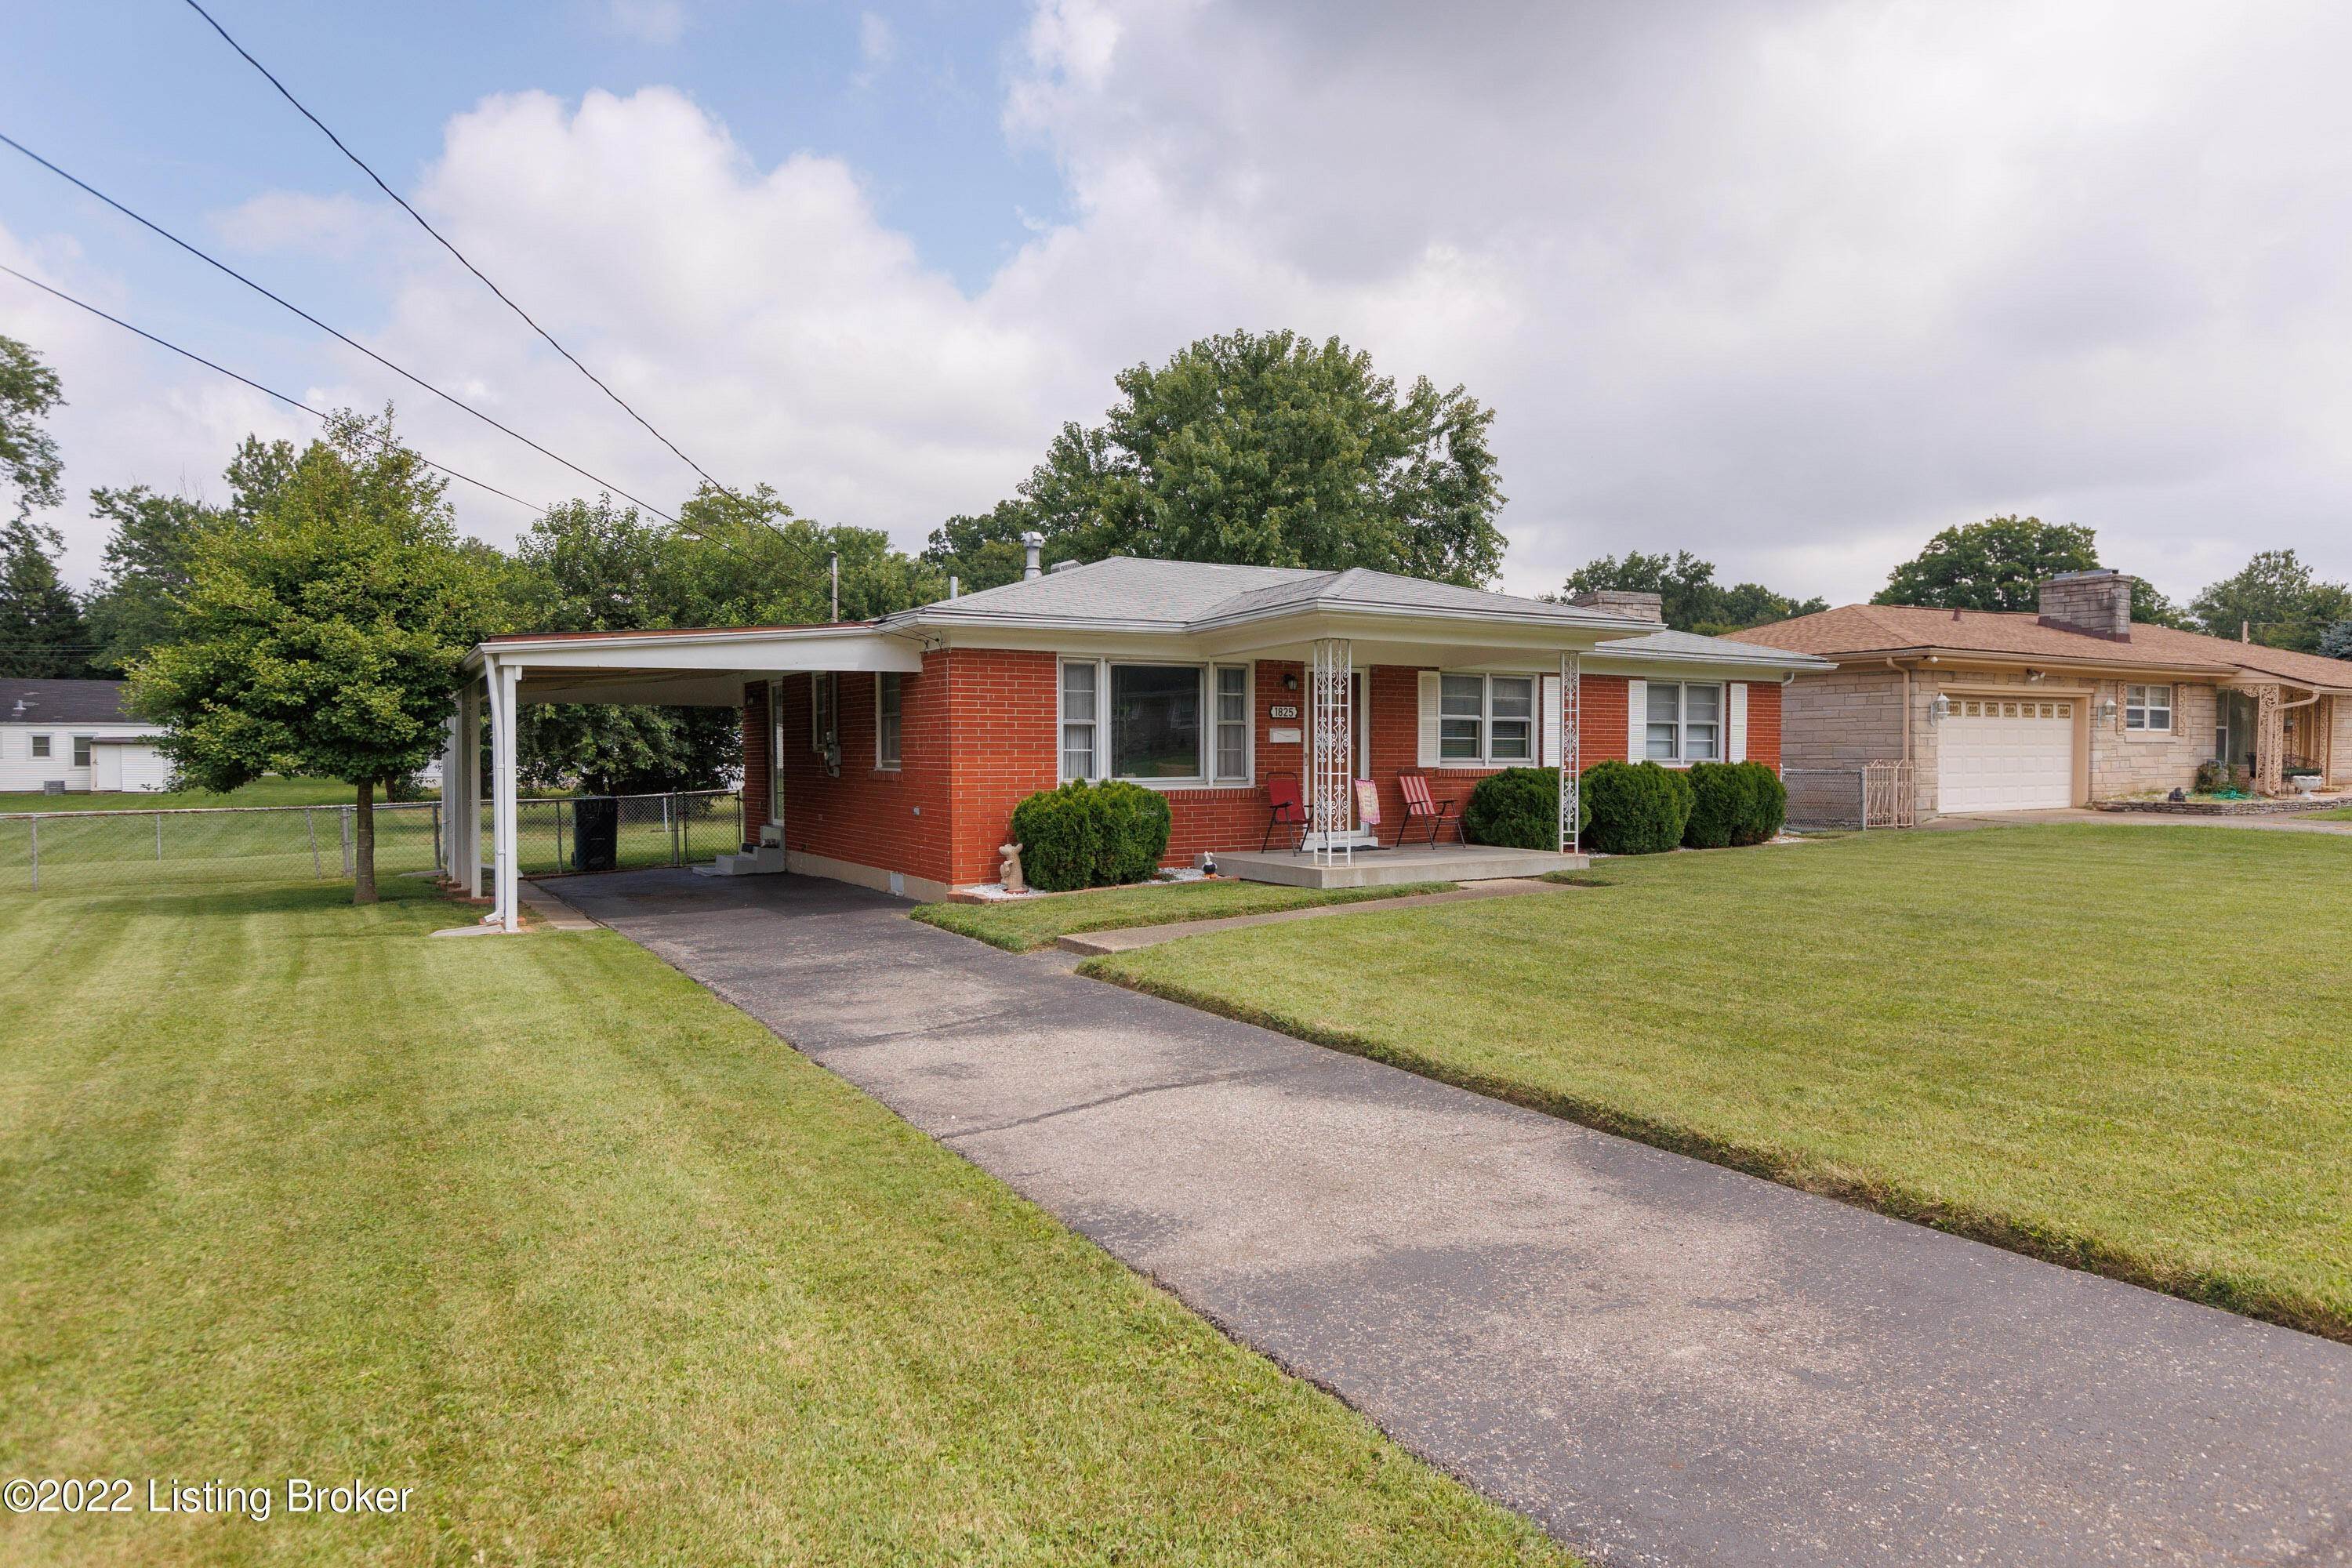 20. Single Family at Louisville, KY 40216